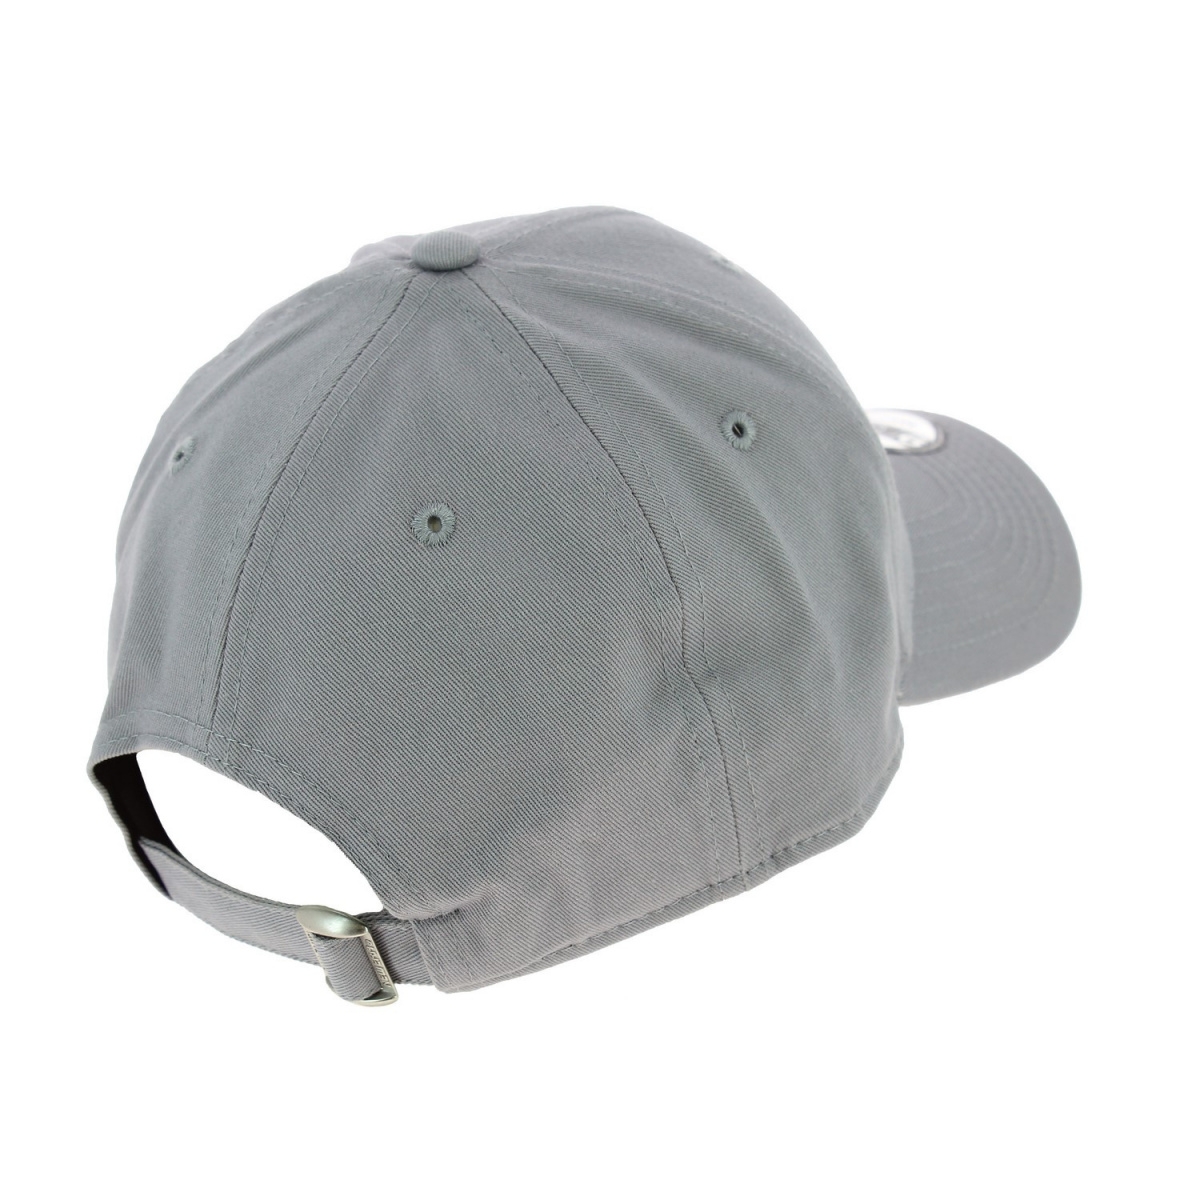 Real Baseball Cap Reference | New-York Chapellerie New - 3635 Era : Traclet Grey